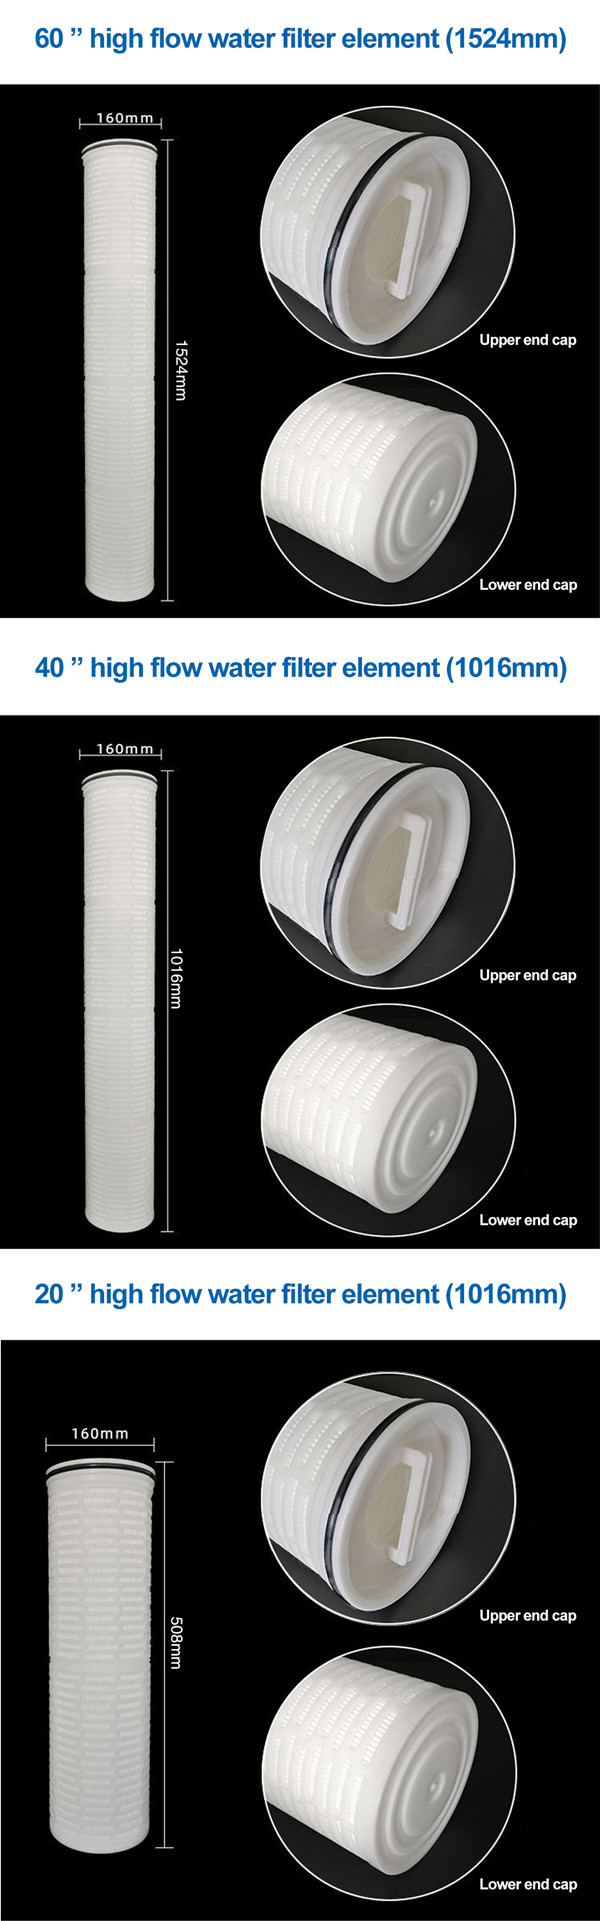 Industrial and commercial filtration High-flow water filter